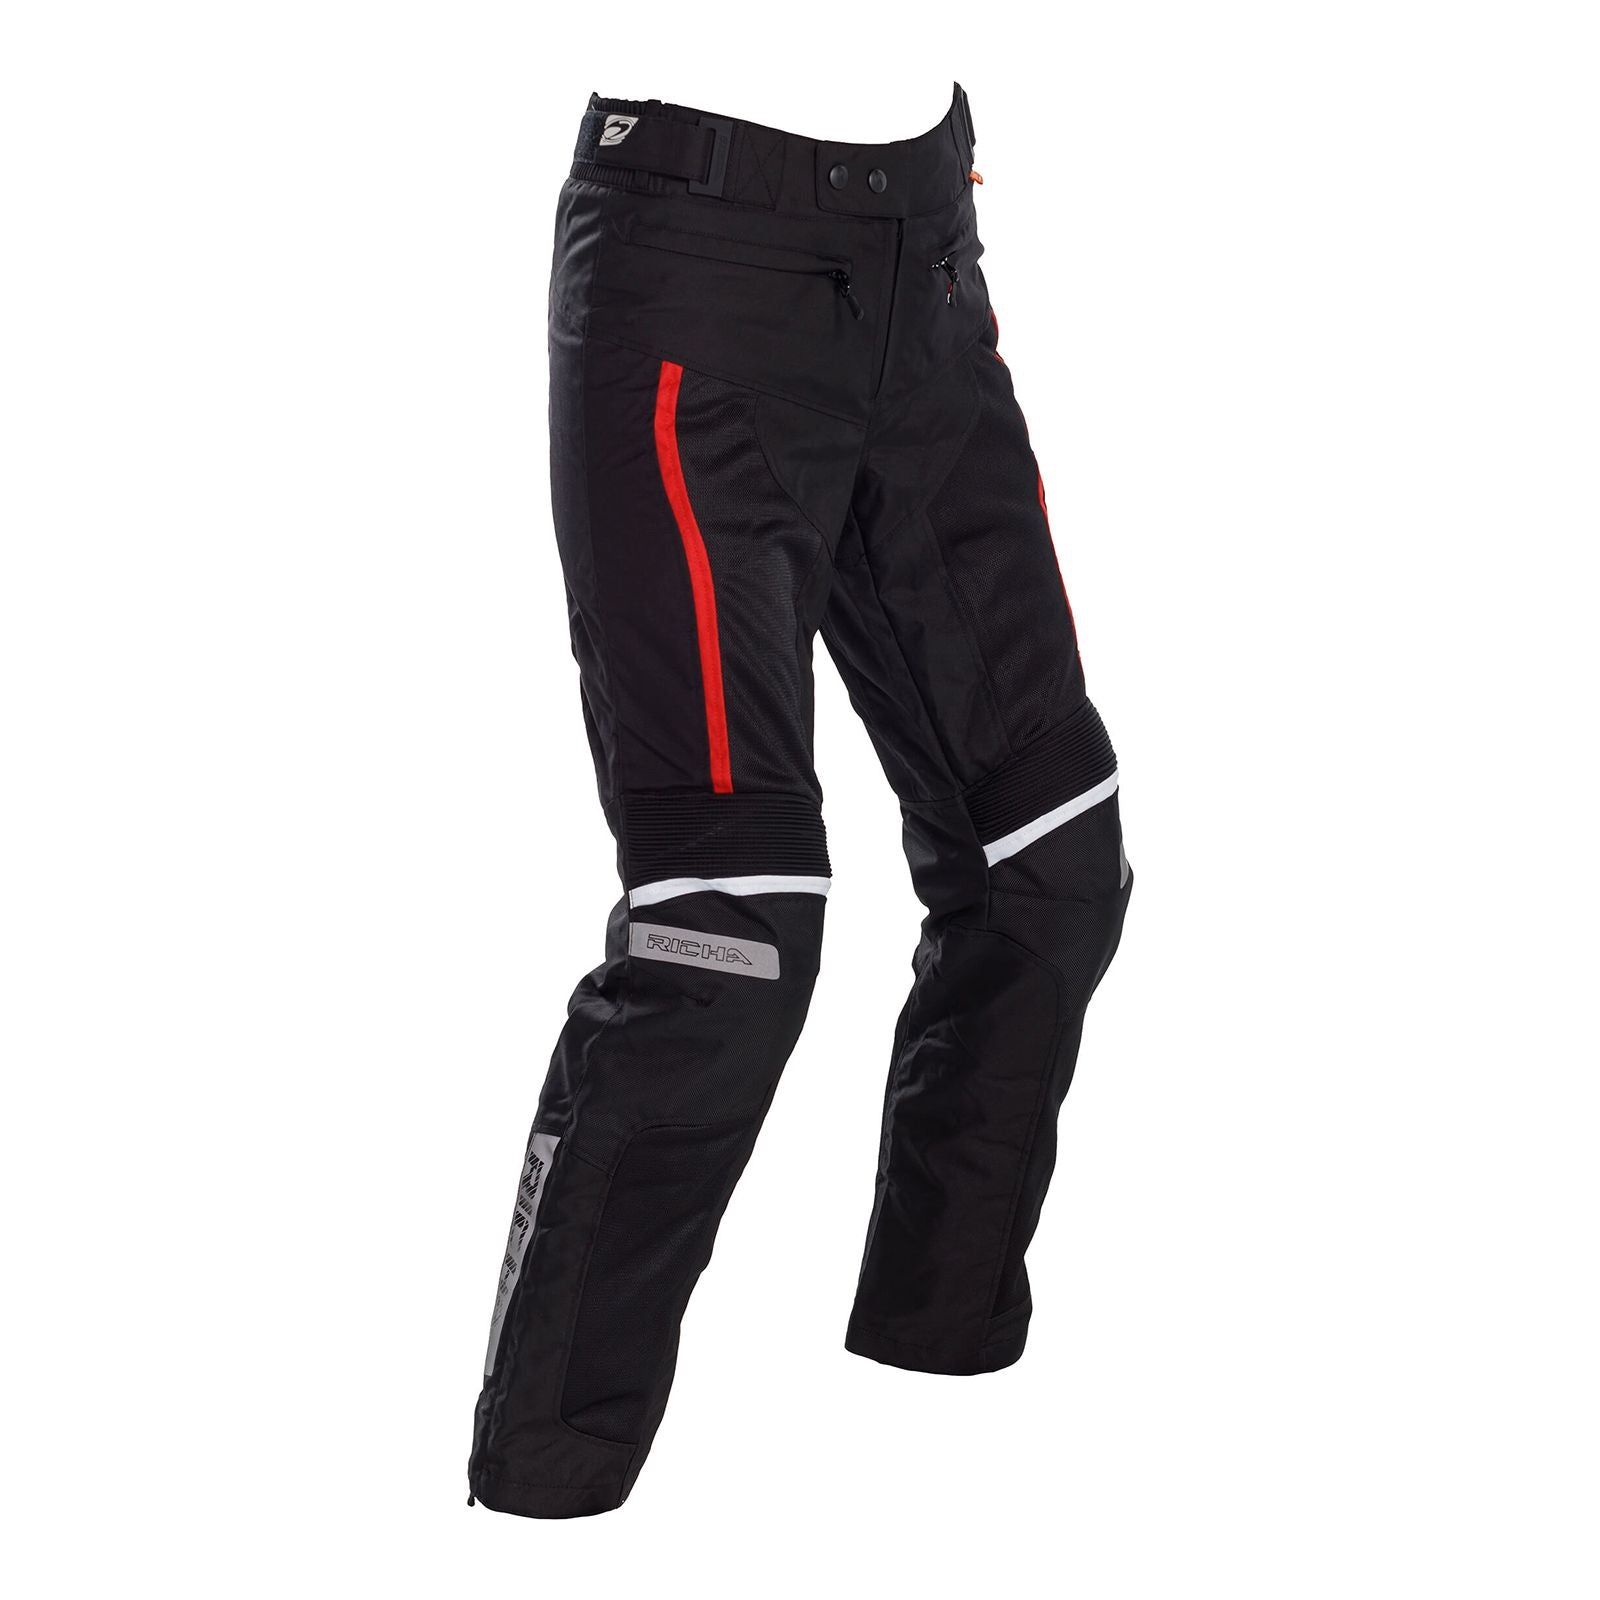 New RICHA AIRVENT EVO PANT BLK//RED 3XL RATPAVABR3XL